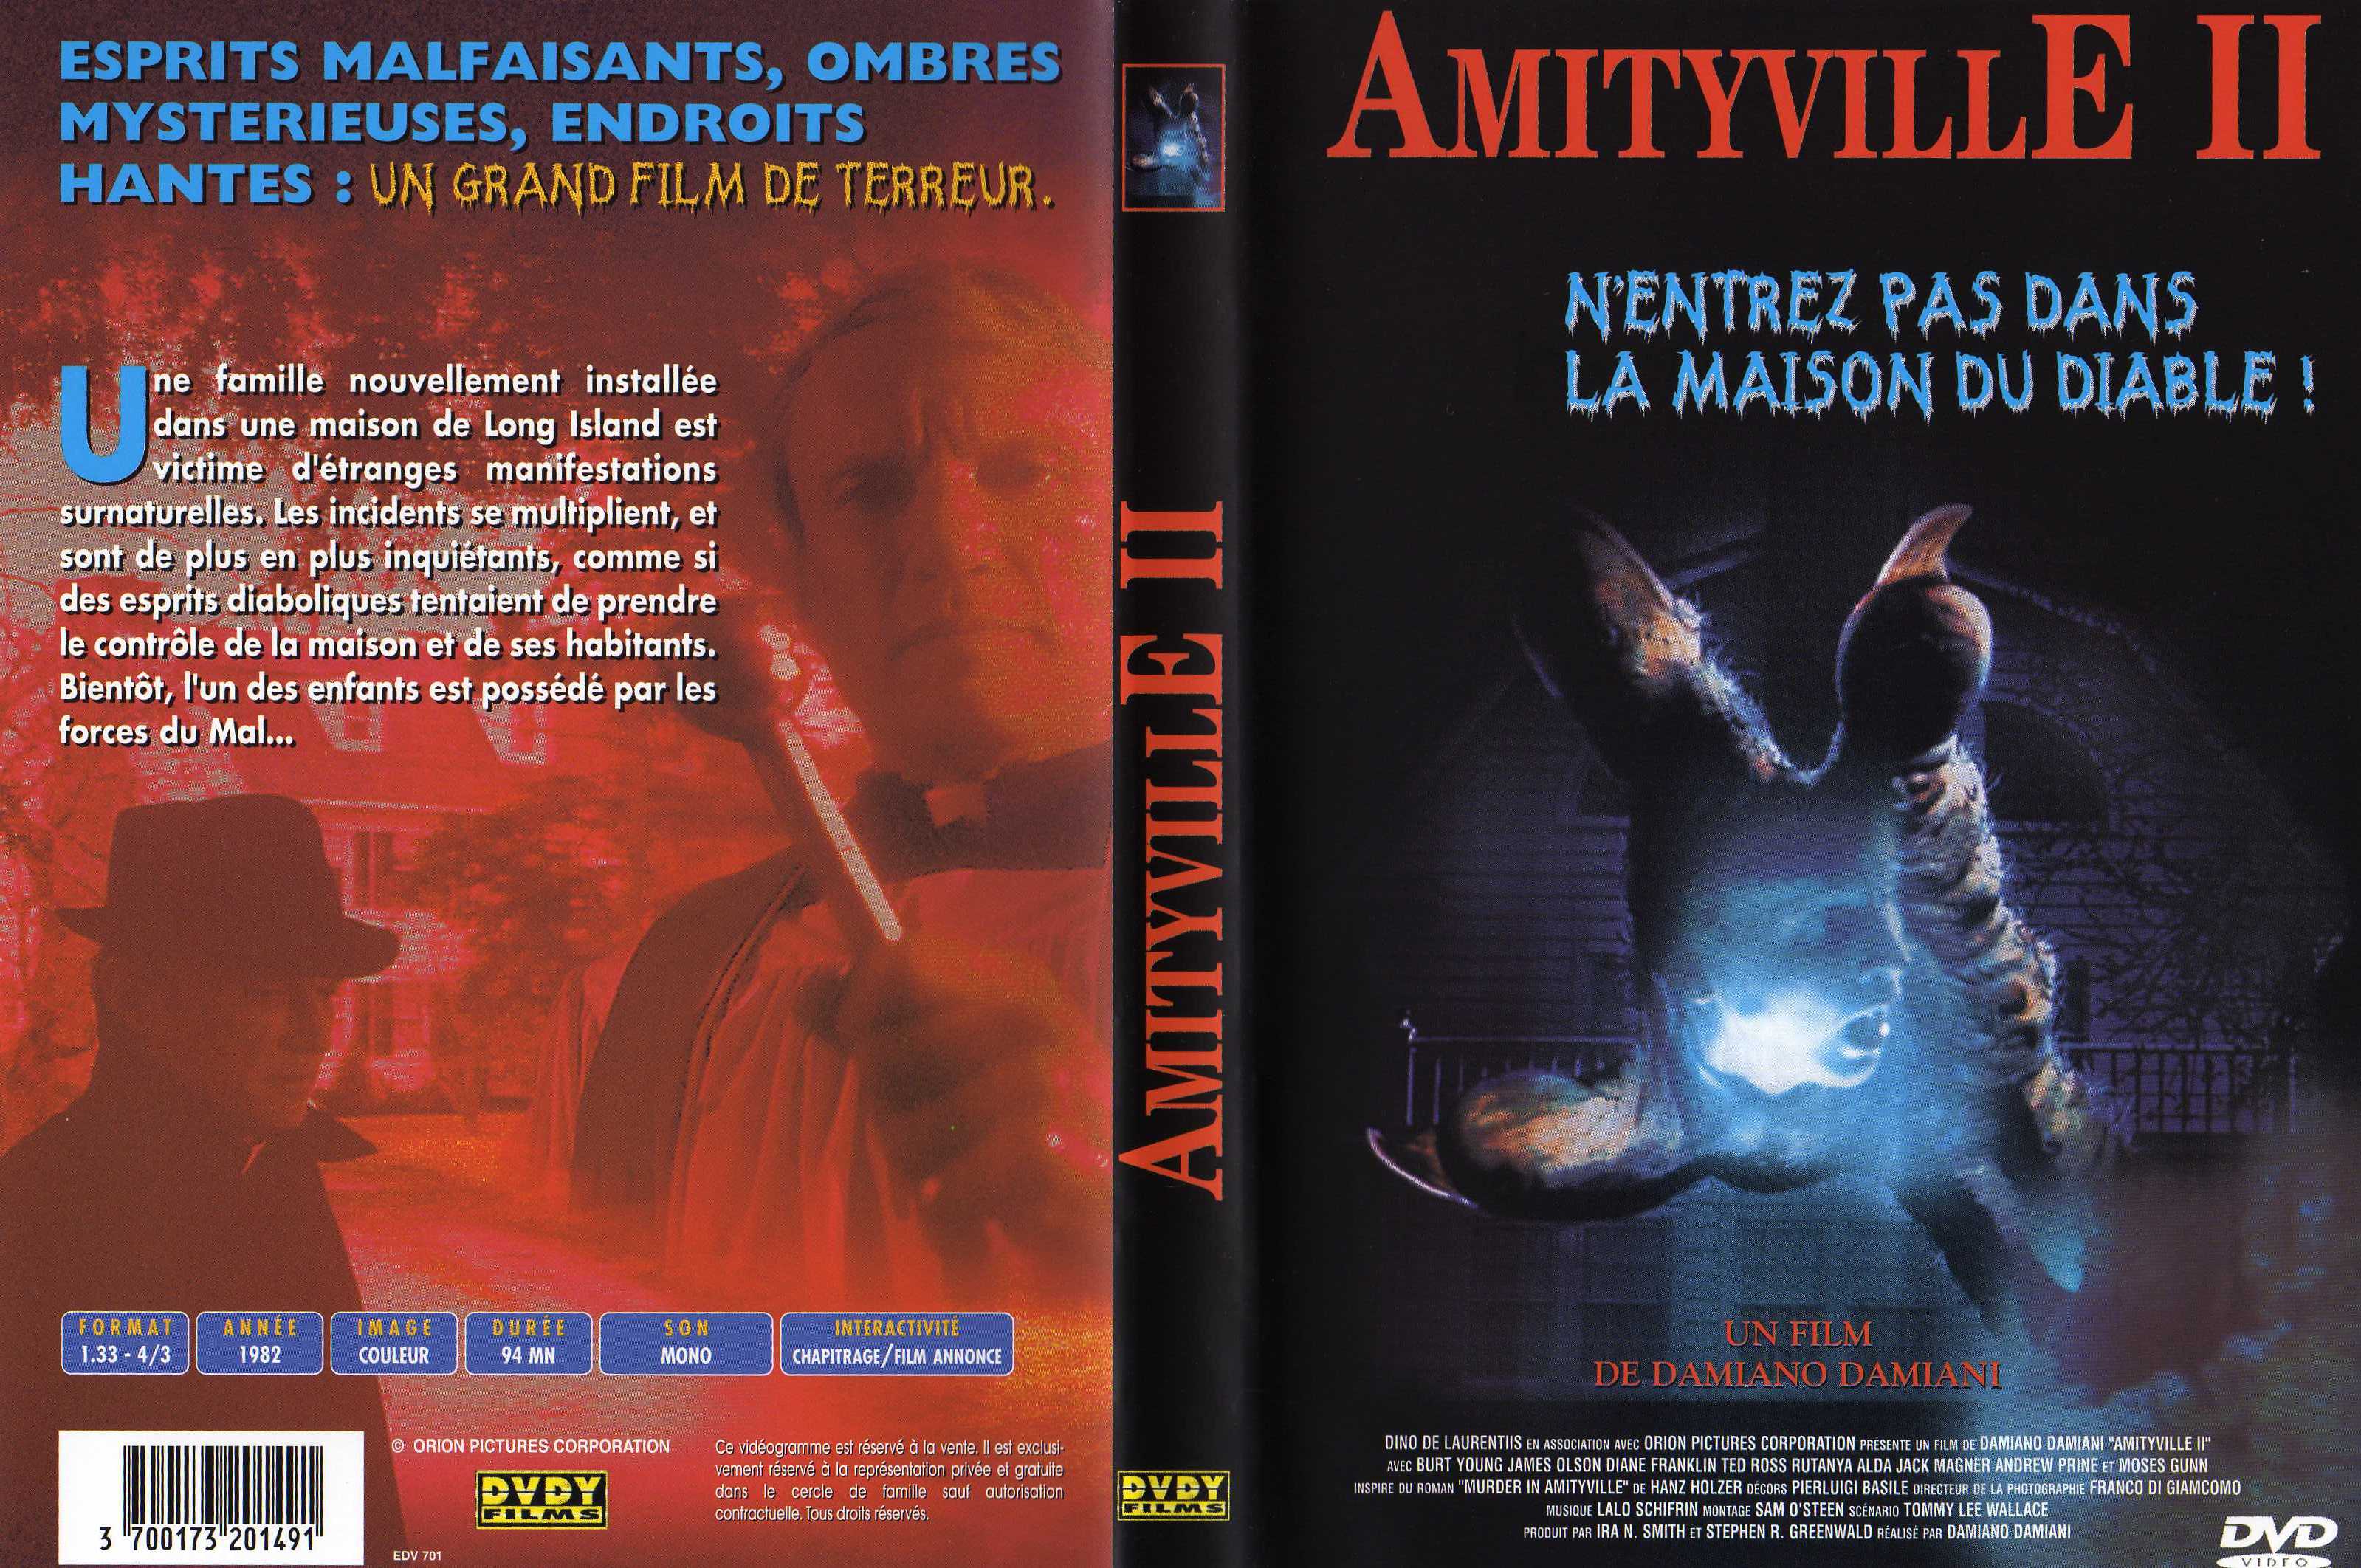 Jaquette DVD Amityville 2 v2